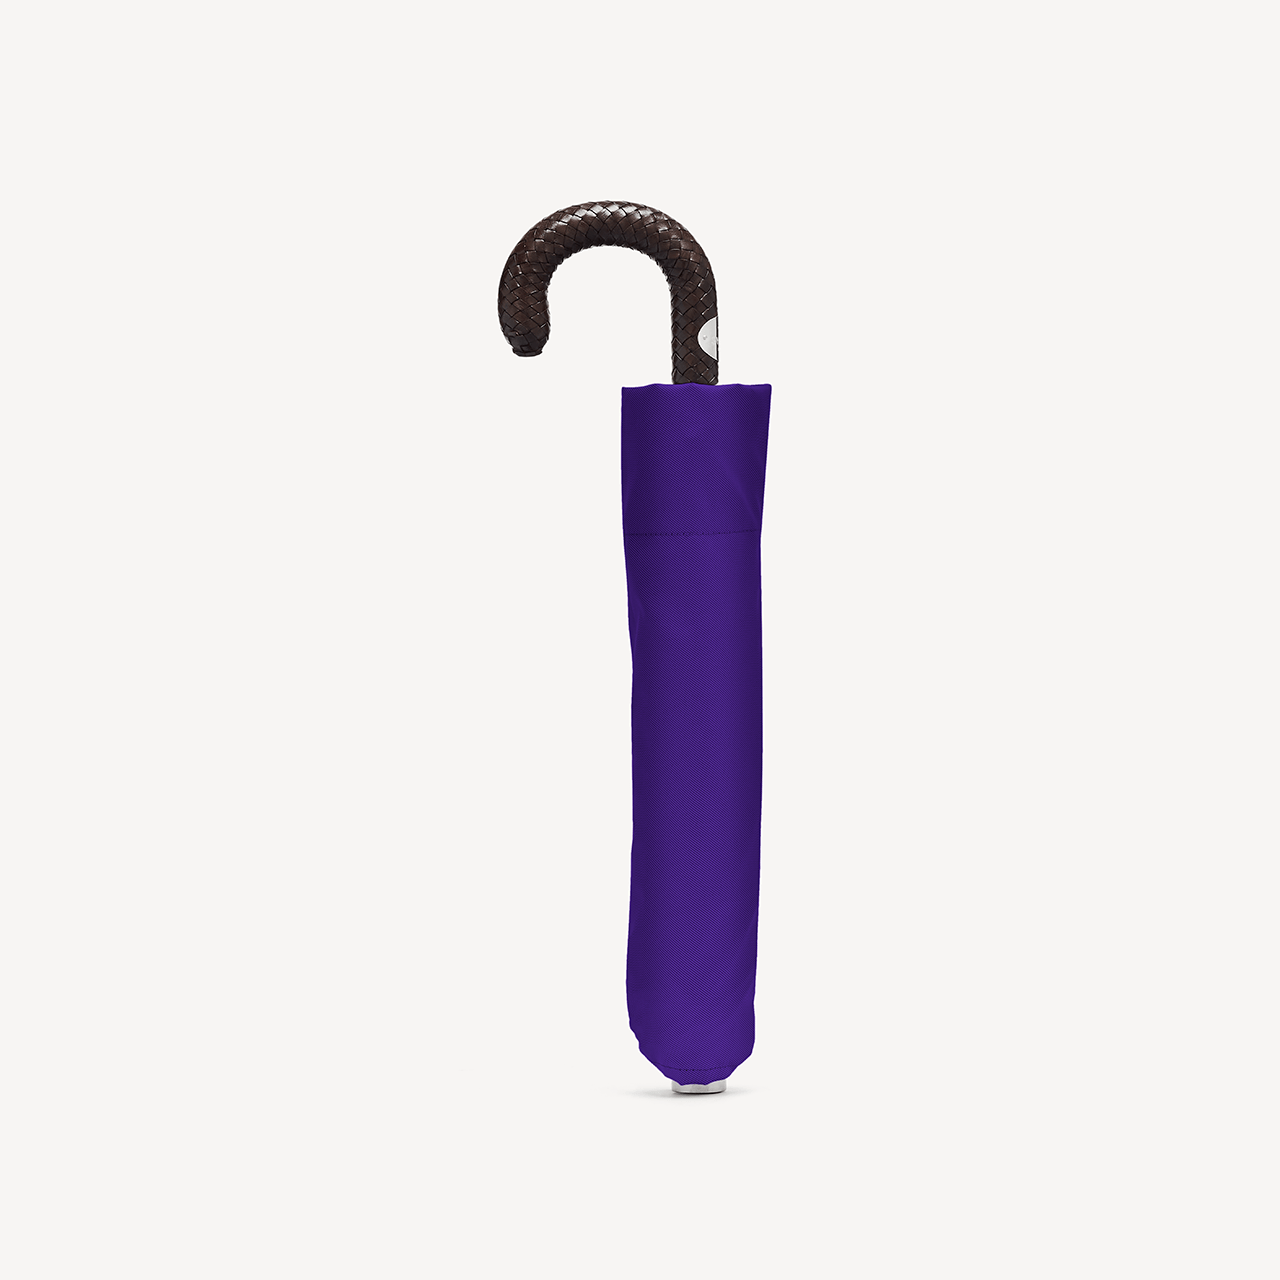 Collapsible Umbrella with Braided Leather Handle - Purple - Swaine